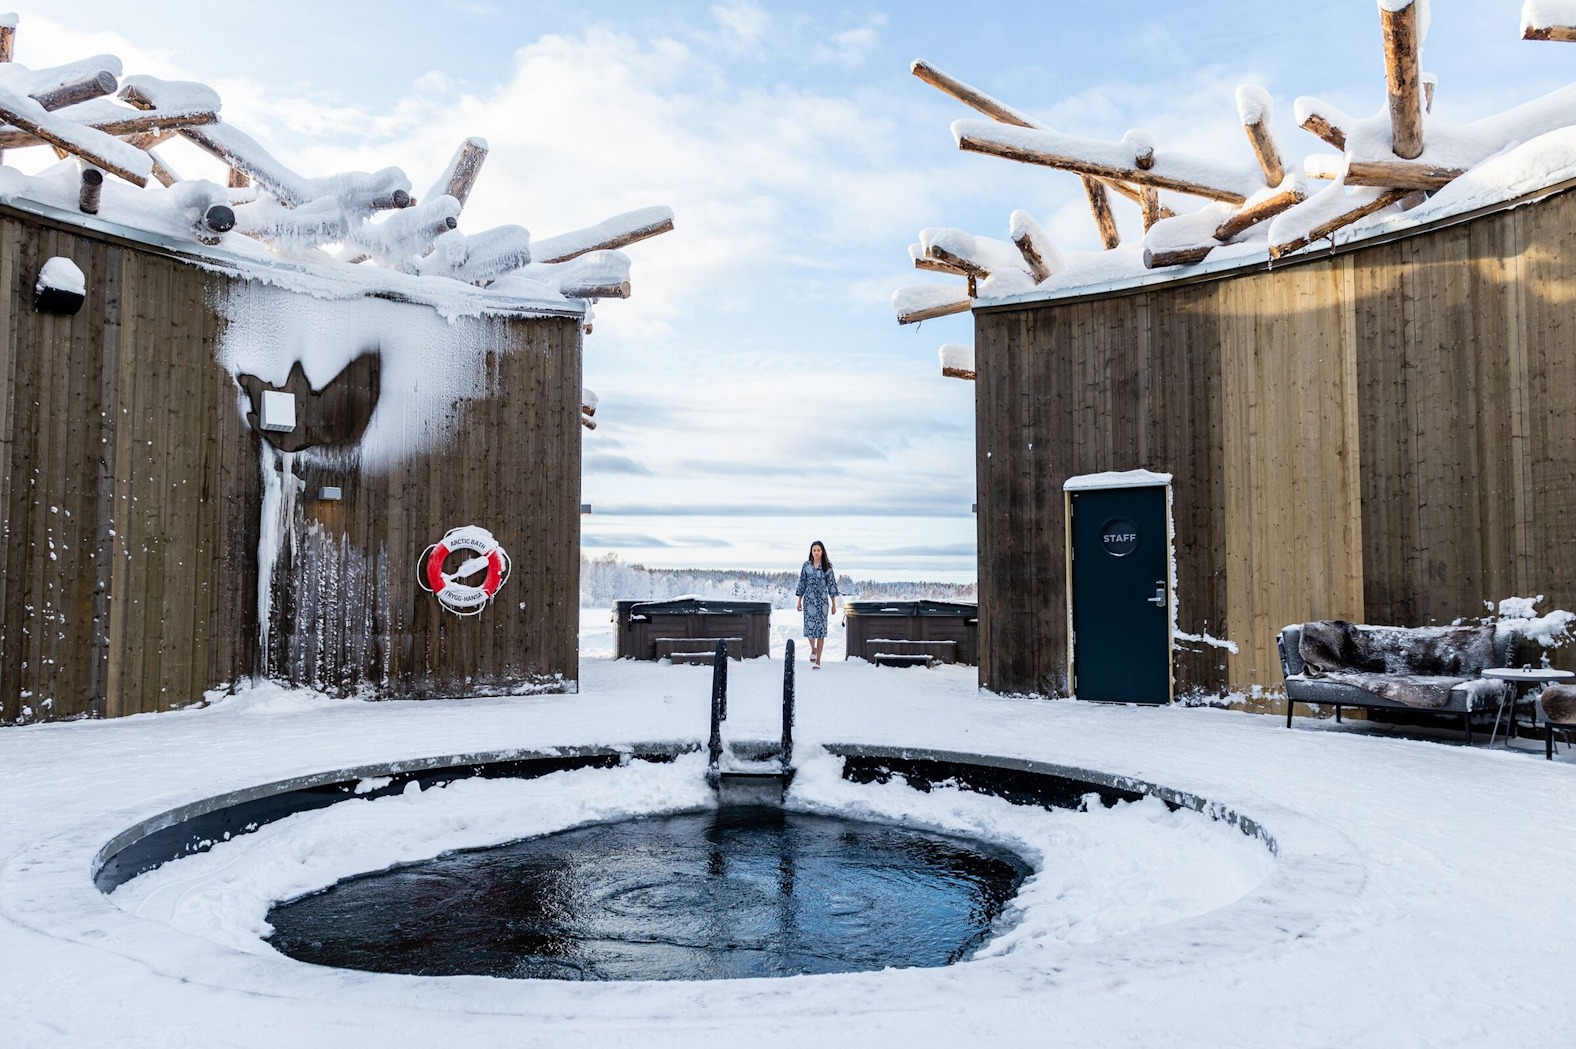 Small Luxury Hotels of the World has signed one of the most unique hotels in the world, the floating Arctic Bath spa hotel in Swedish Lapland. Click to enlarge.